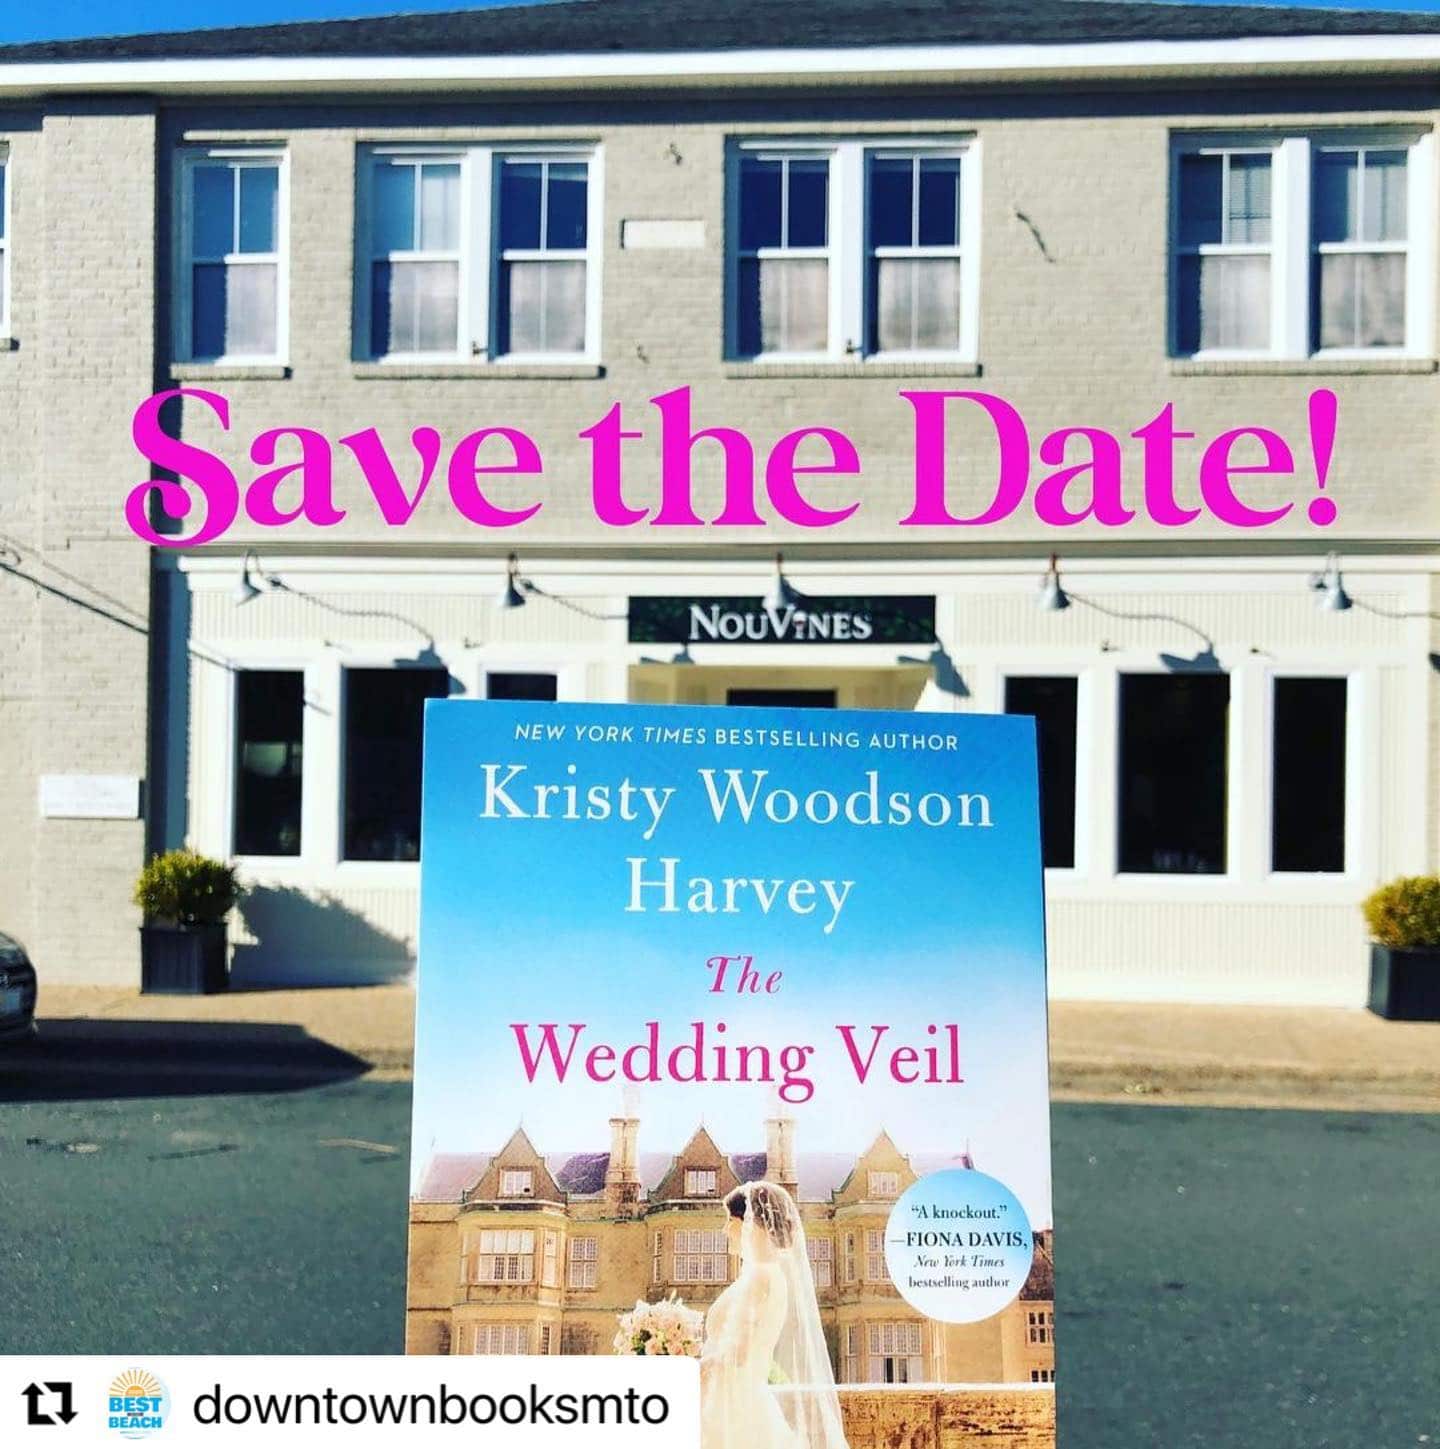 It’s getting real!! Full tour dates coming at the end of the week. If you’re near the OBX (or want a vacay!) save the date for April 6!!! Tickets available Friday!
#repost @downtownbooksmto with @make_repost
・・・
April 6… A Toast to The Wedding Veil with @kristywharvey .. tickets and details available Friday! @nouvines #booksigning #meettheauthor #authorevent #biltmoreestate #downtownmanteo #manteoreads #obxbooks #weddingveil